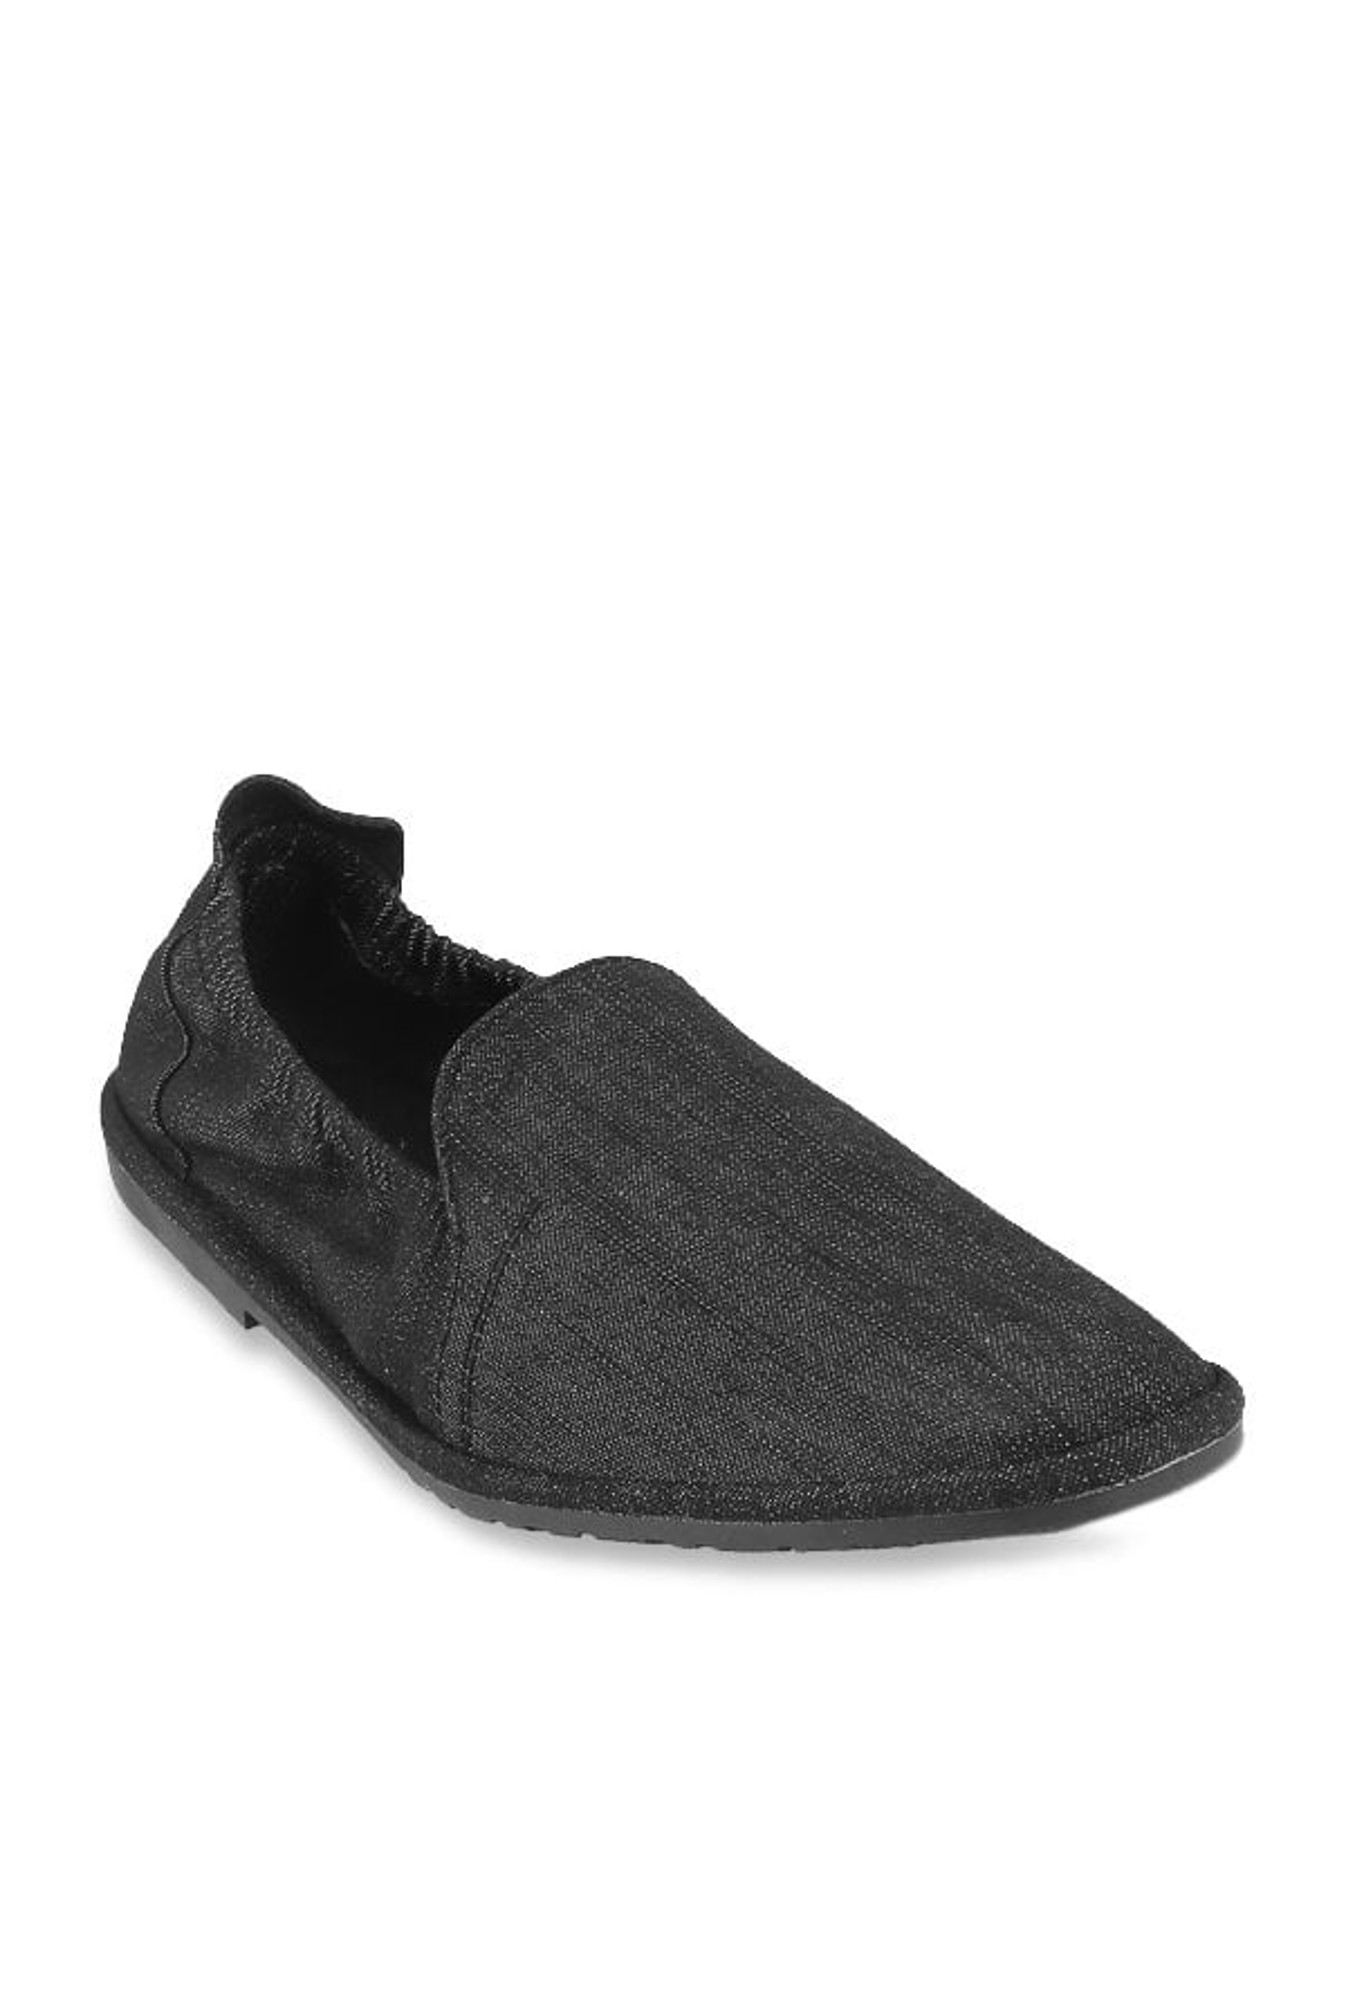 Buy Genx Men Red Casual Loafers Online